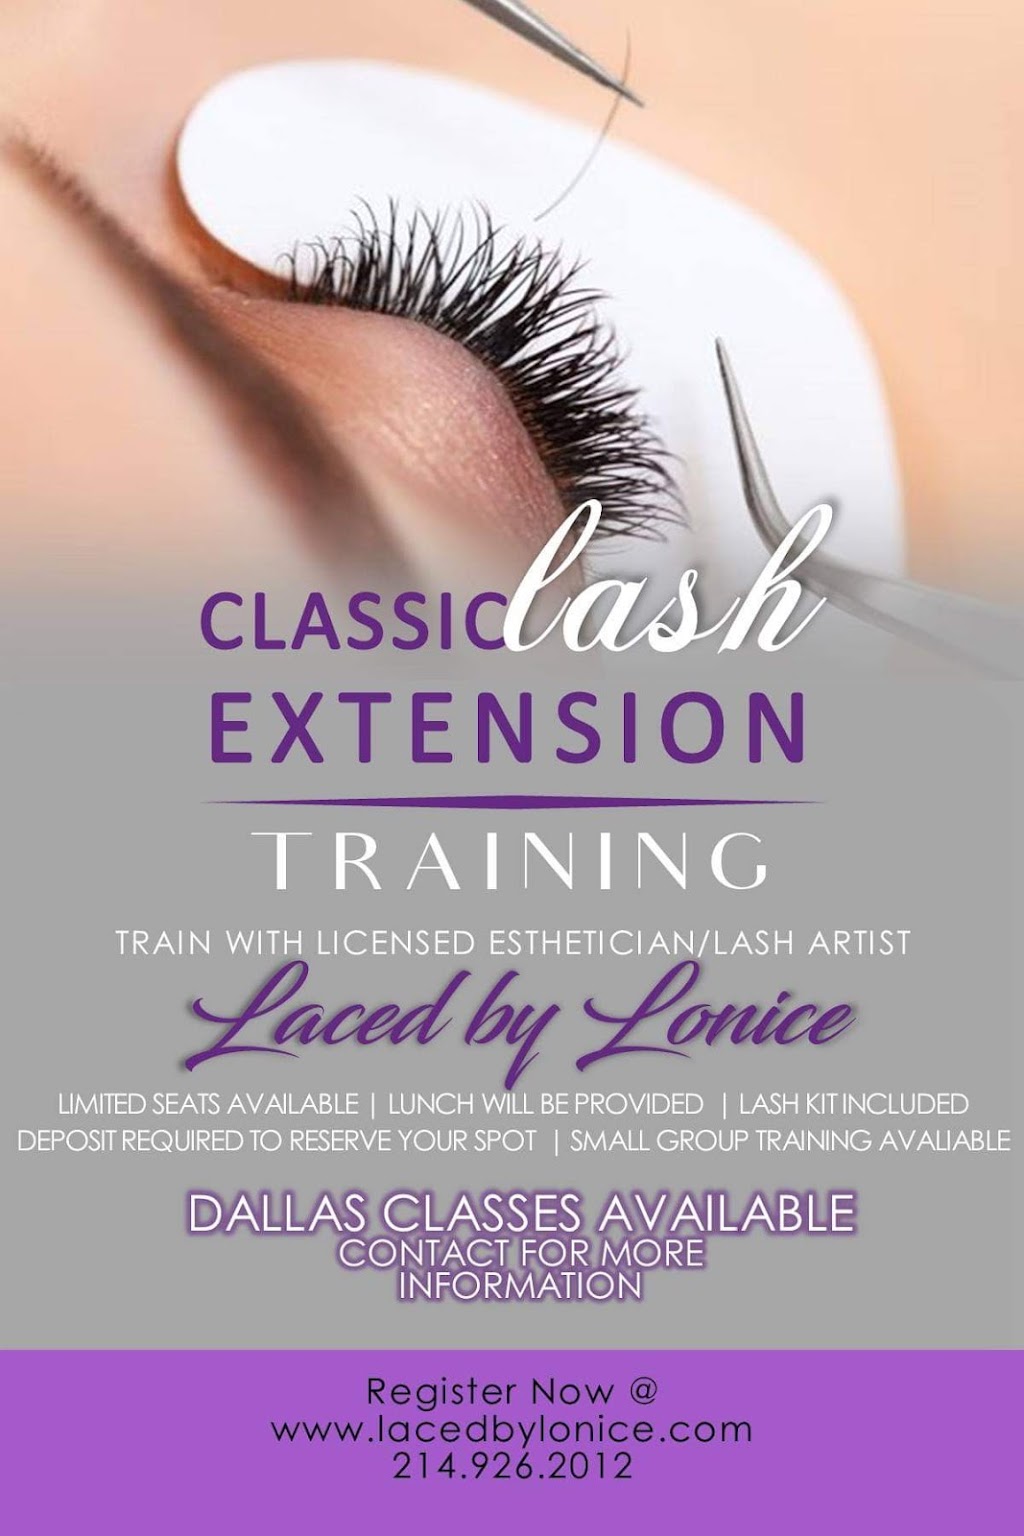 Laced by Lonice Spa & Boutique | 2504 Kimsey Dr, Dallas, TX 75235, USA | Phone: (214) 926-2012